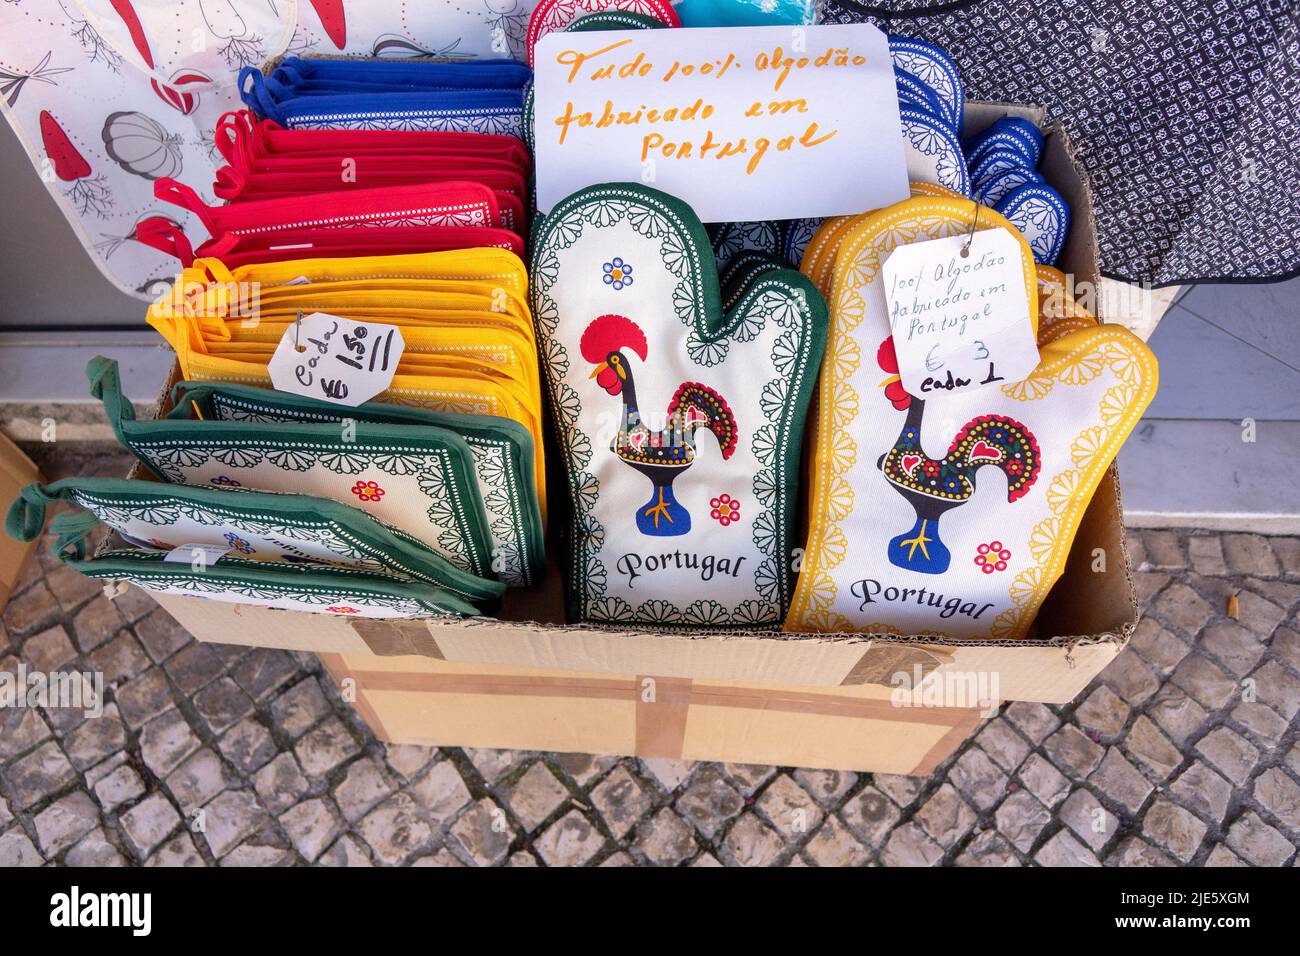 Souvenir Portuguese Rooster Oven Mitts For Sale Outside A Shop In Portugal, Rooster of Barcelos (Galo de Barcelos) Stock Photo